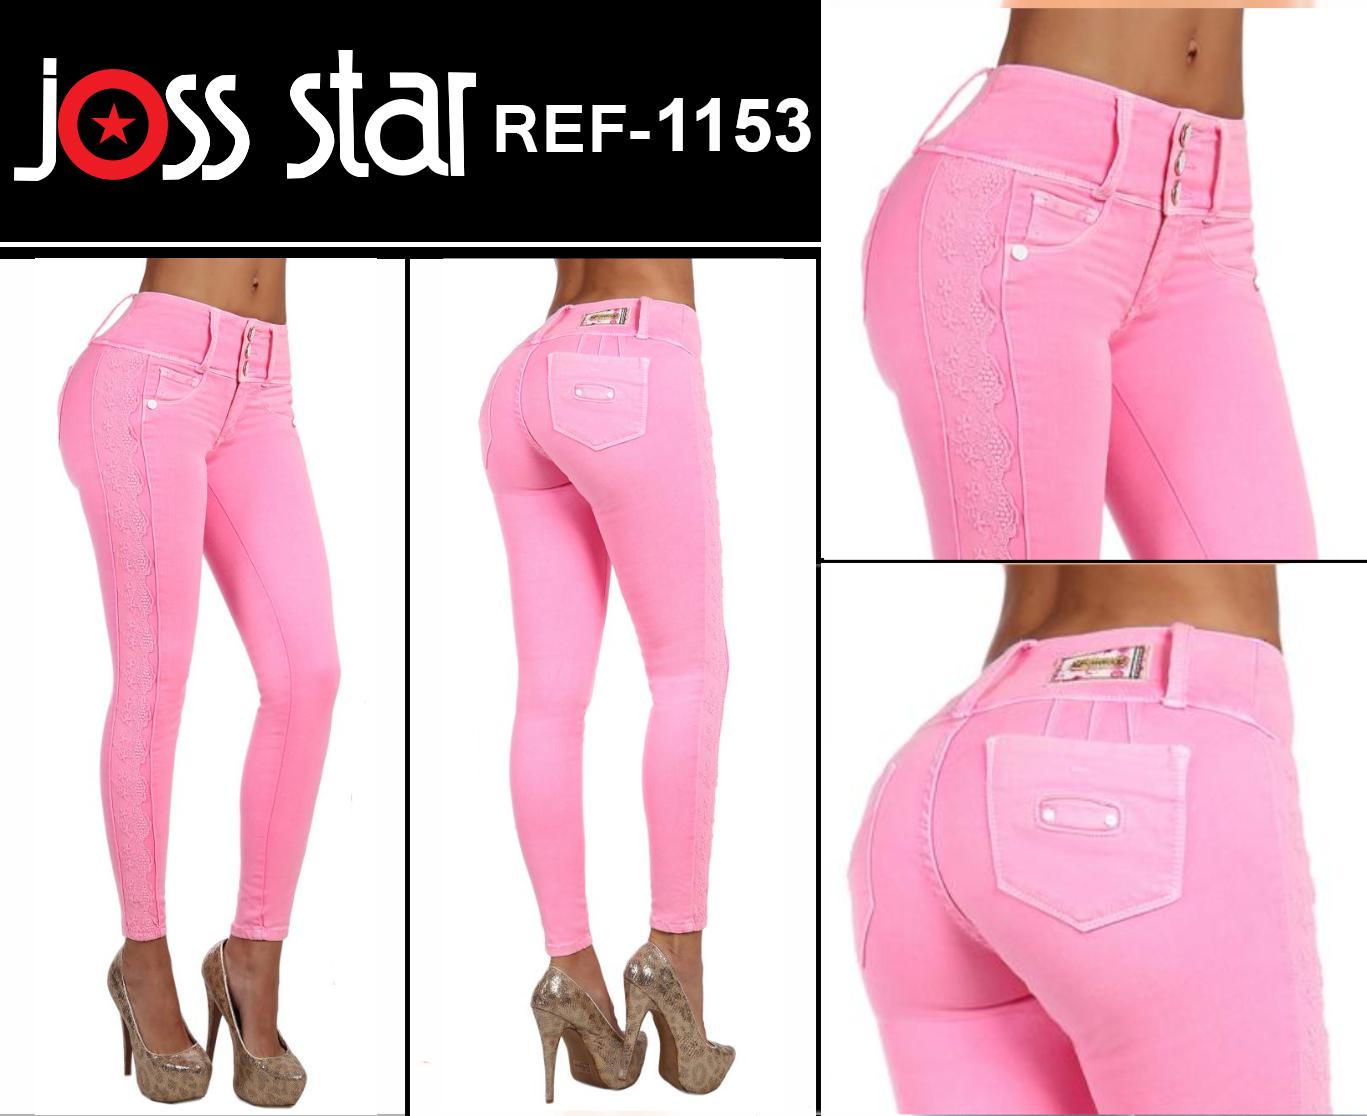 Cowboy pants for Lady with Enhancement Lift, 3 Buttons High Waistband, Pink Color and With Abundant Embroidery on Sides